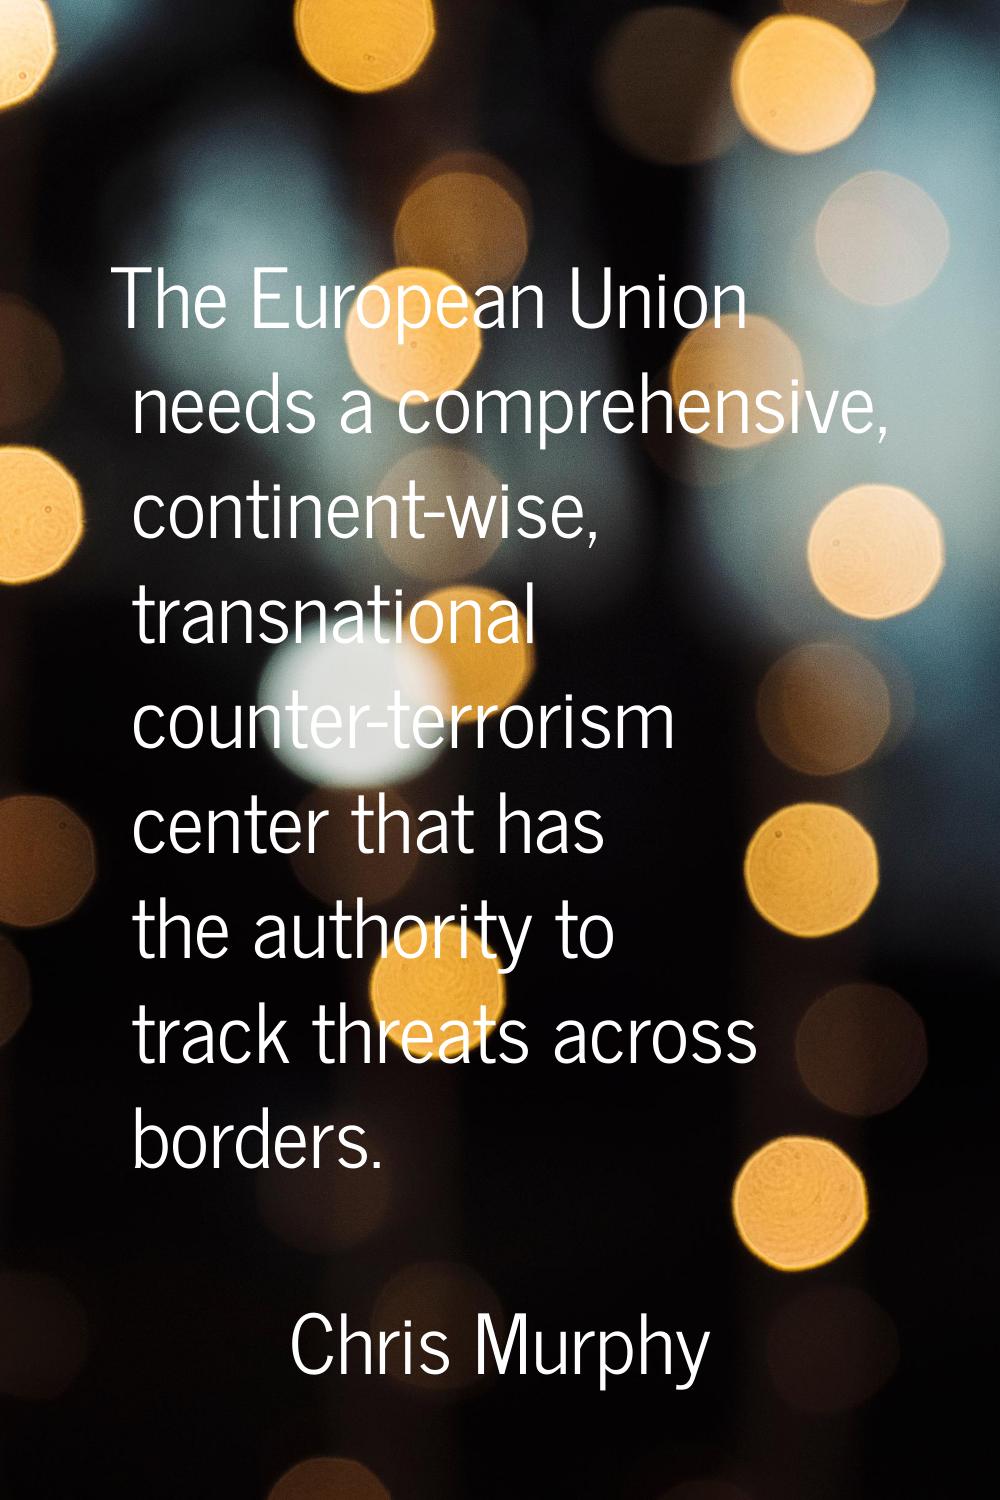 The European Union needs a comprehensive, continent-wise, transnational counter-terrorism center th